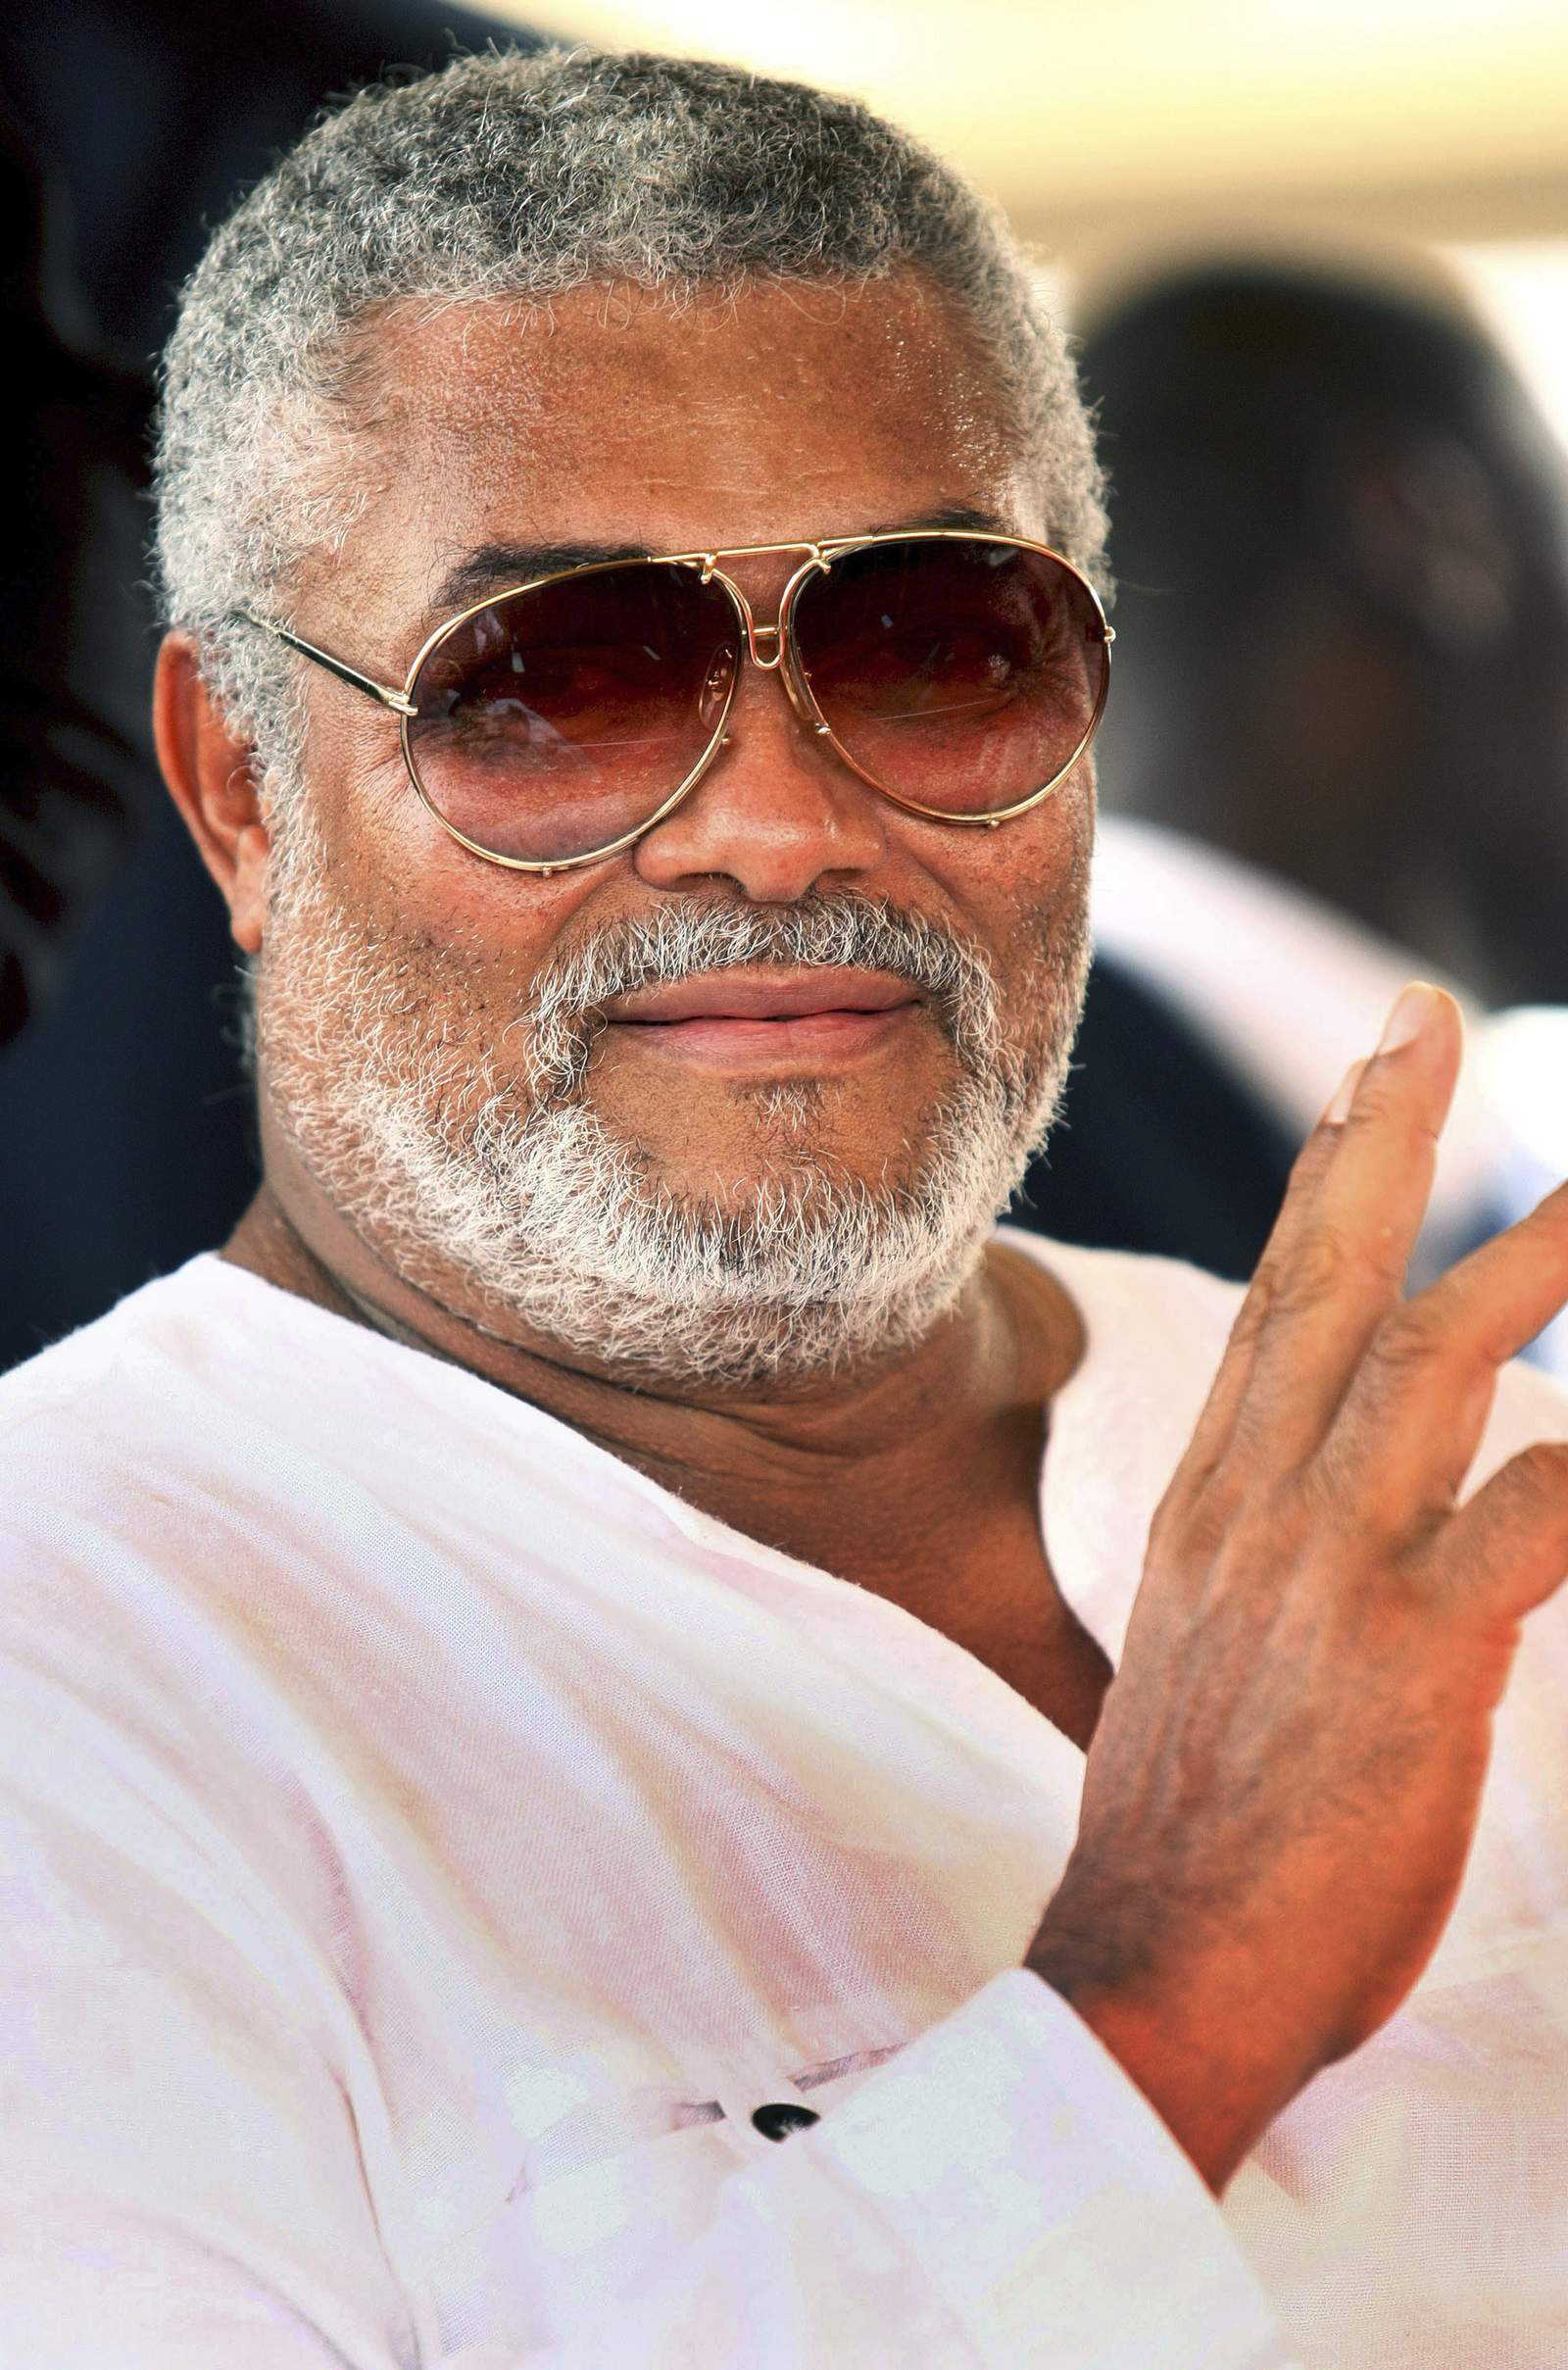 Ghana buries former president Jerry Rawlings with honors